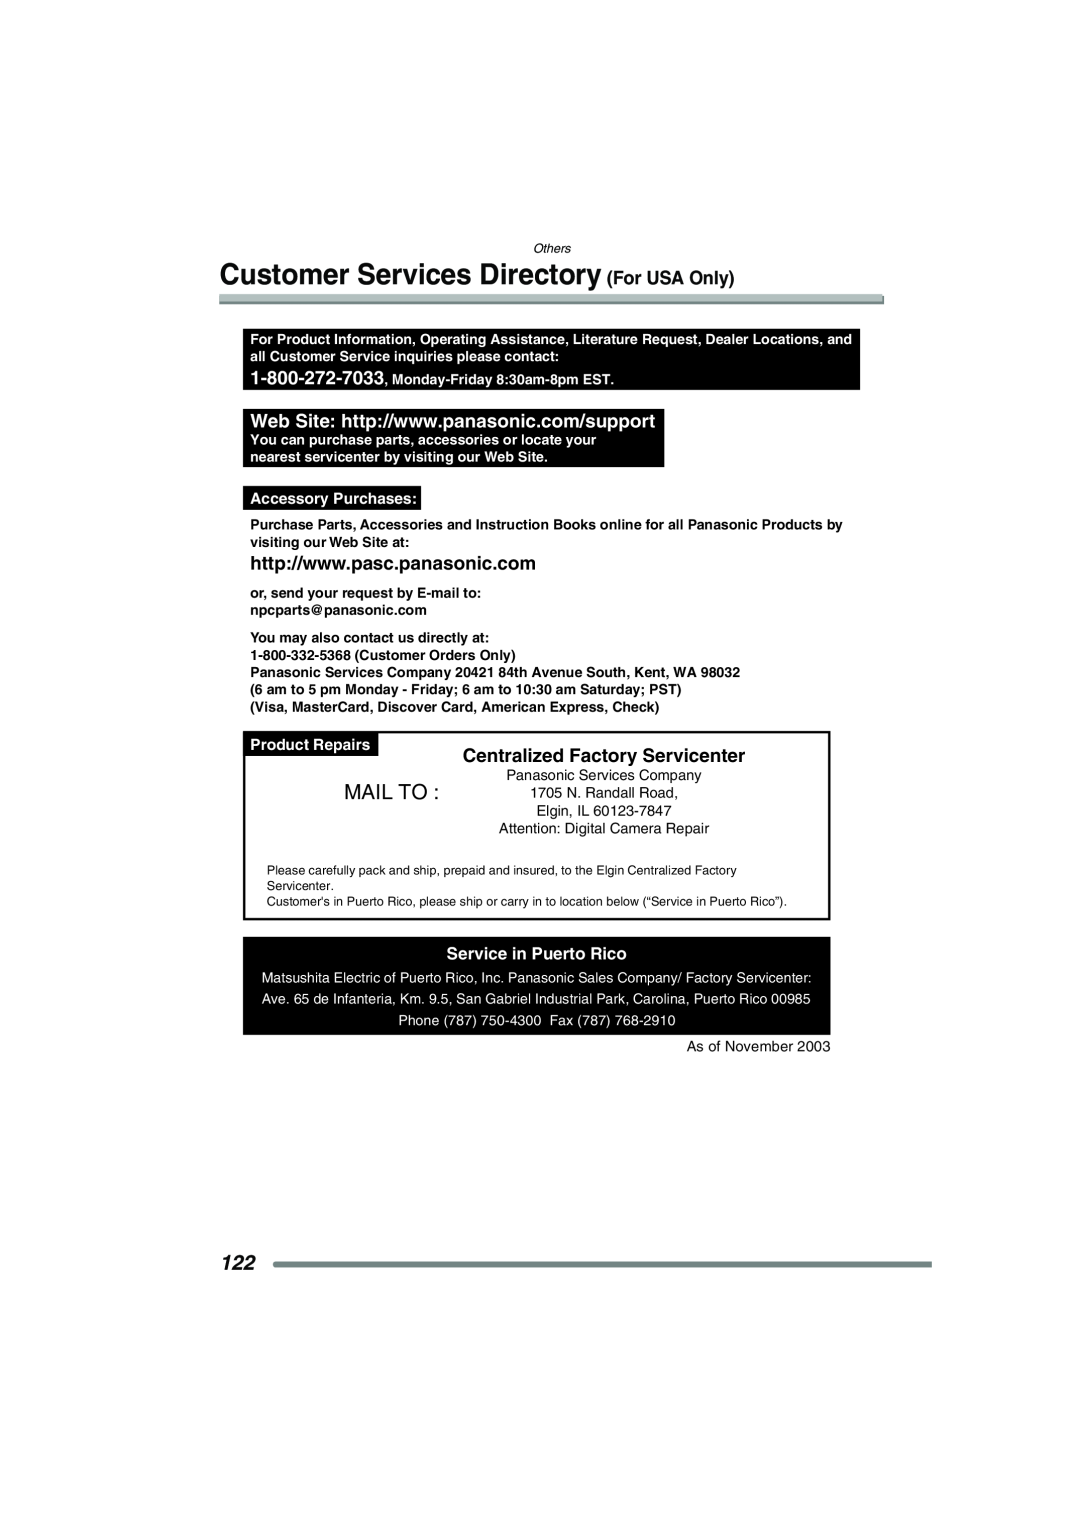 Panasonic DMC-FZ20PP Customer Services Directory For USA Only, Mail To, Centralized Factory Servicenter, Product Repairs 